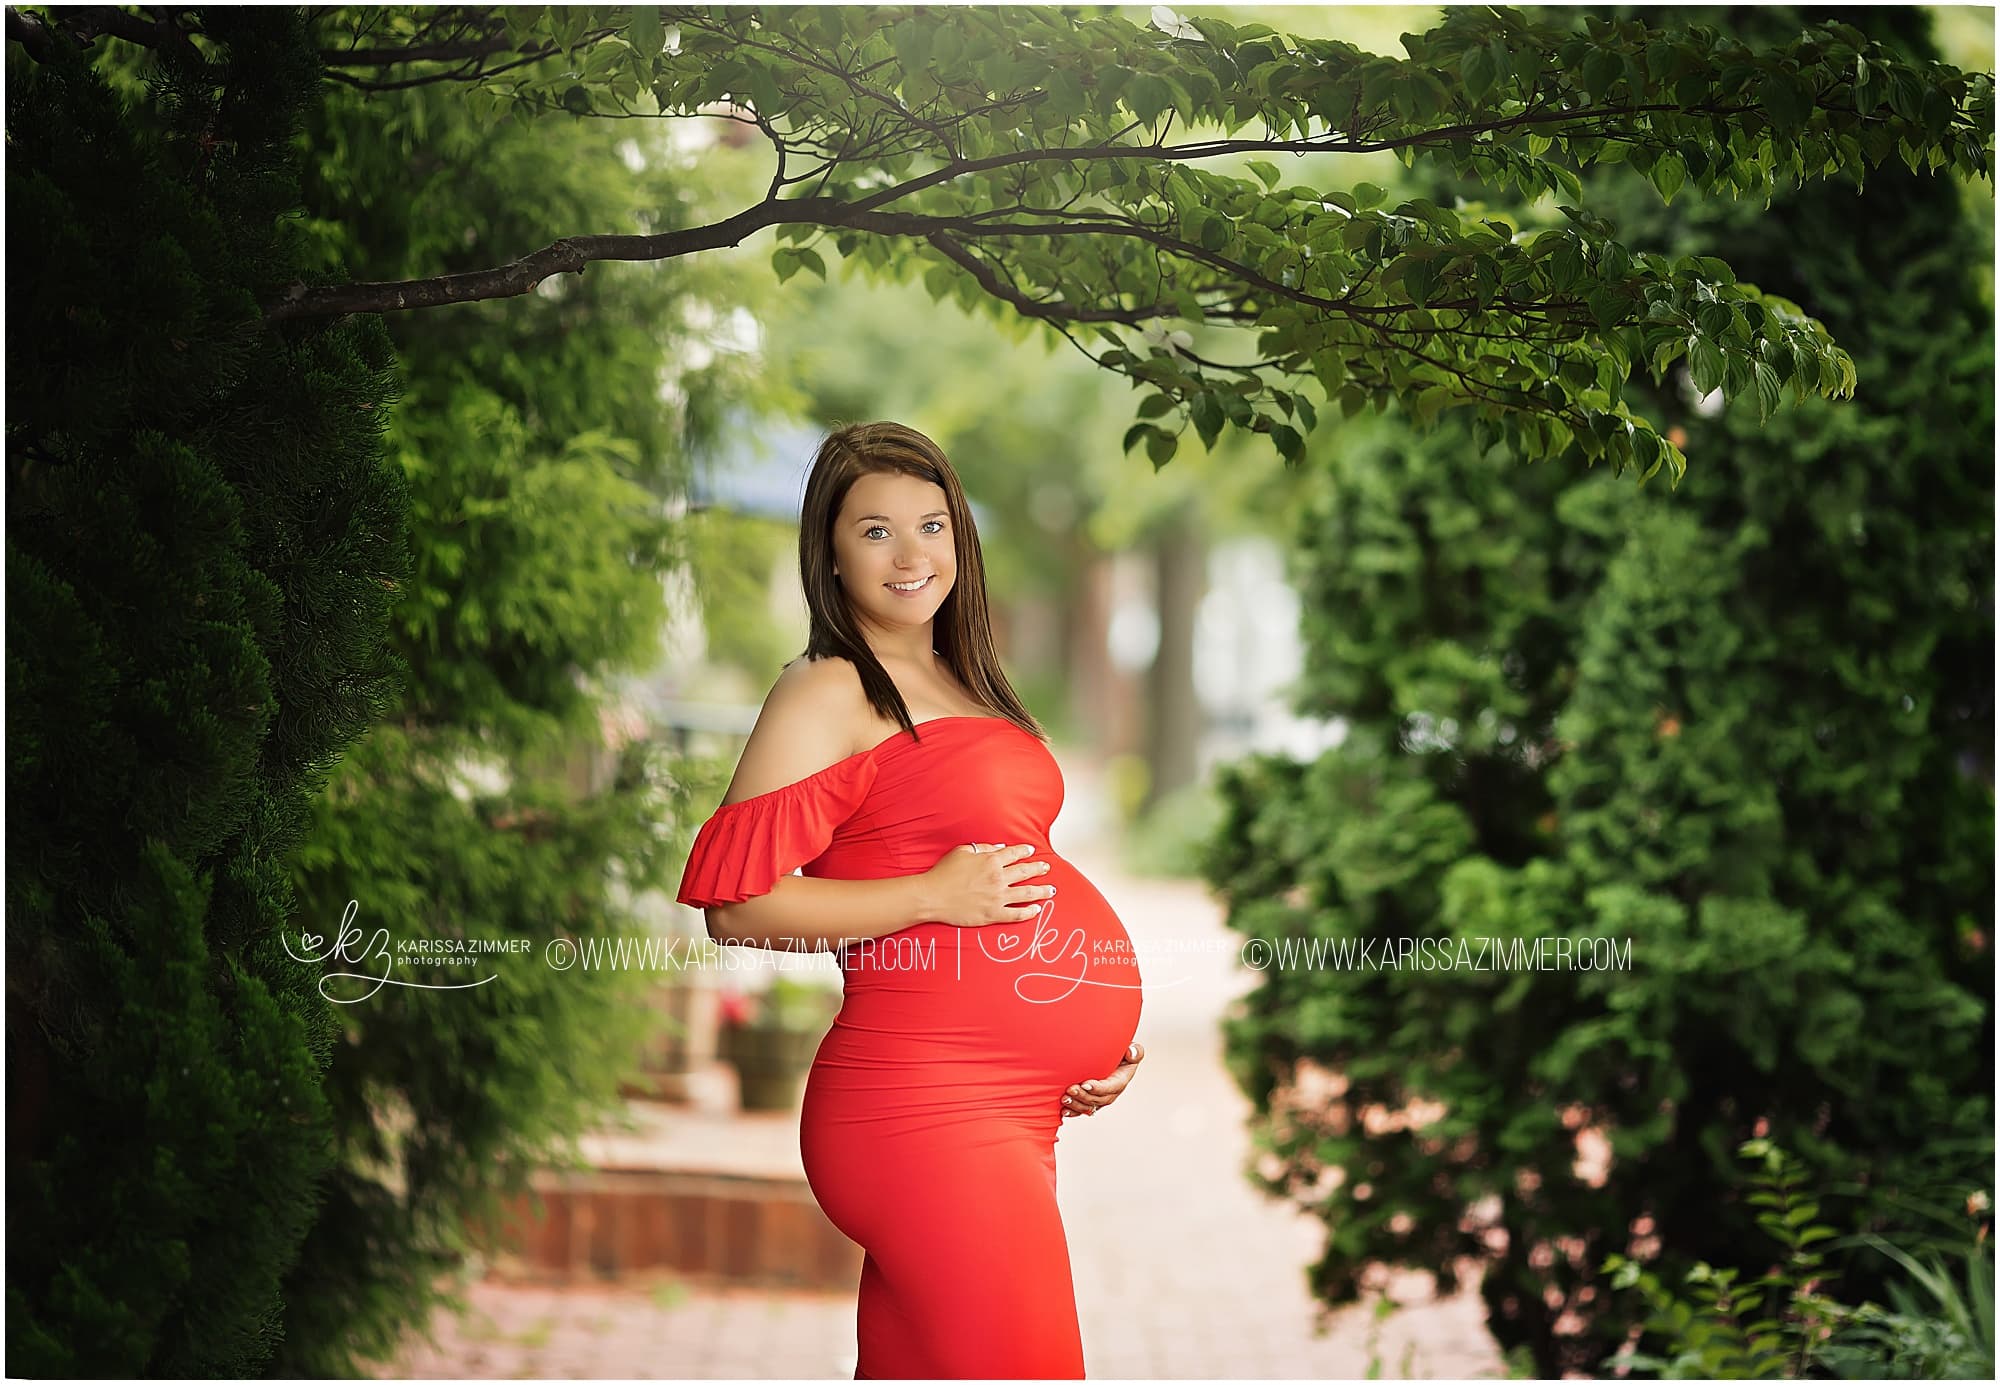 camp hill maternity photos, maternity photoshoot near me, professional pregnancy photography, camp hill maternity photographer